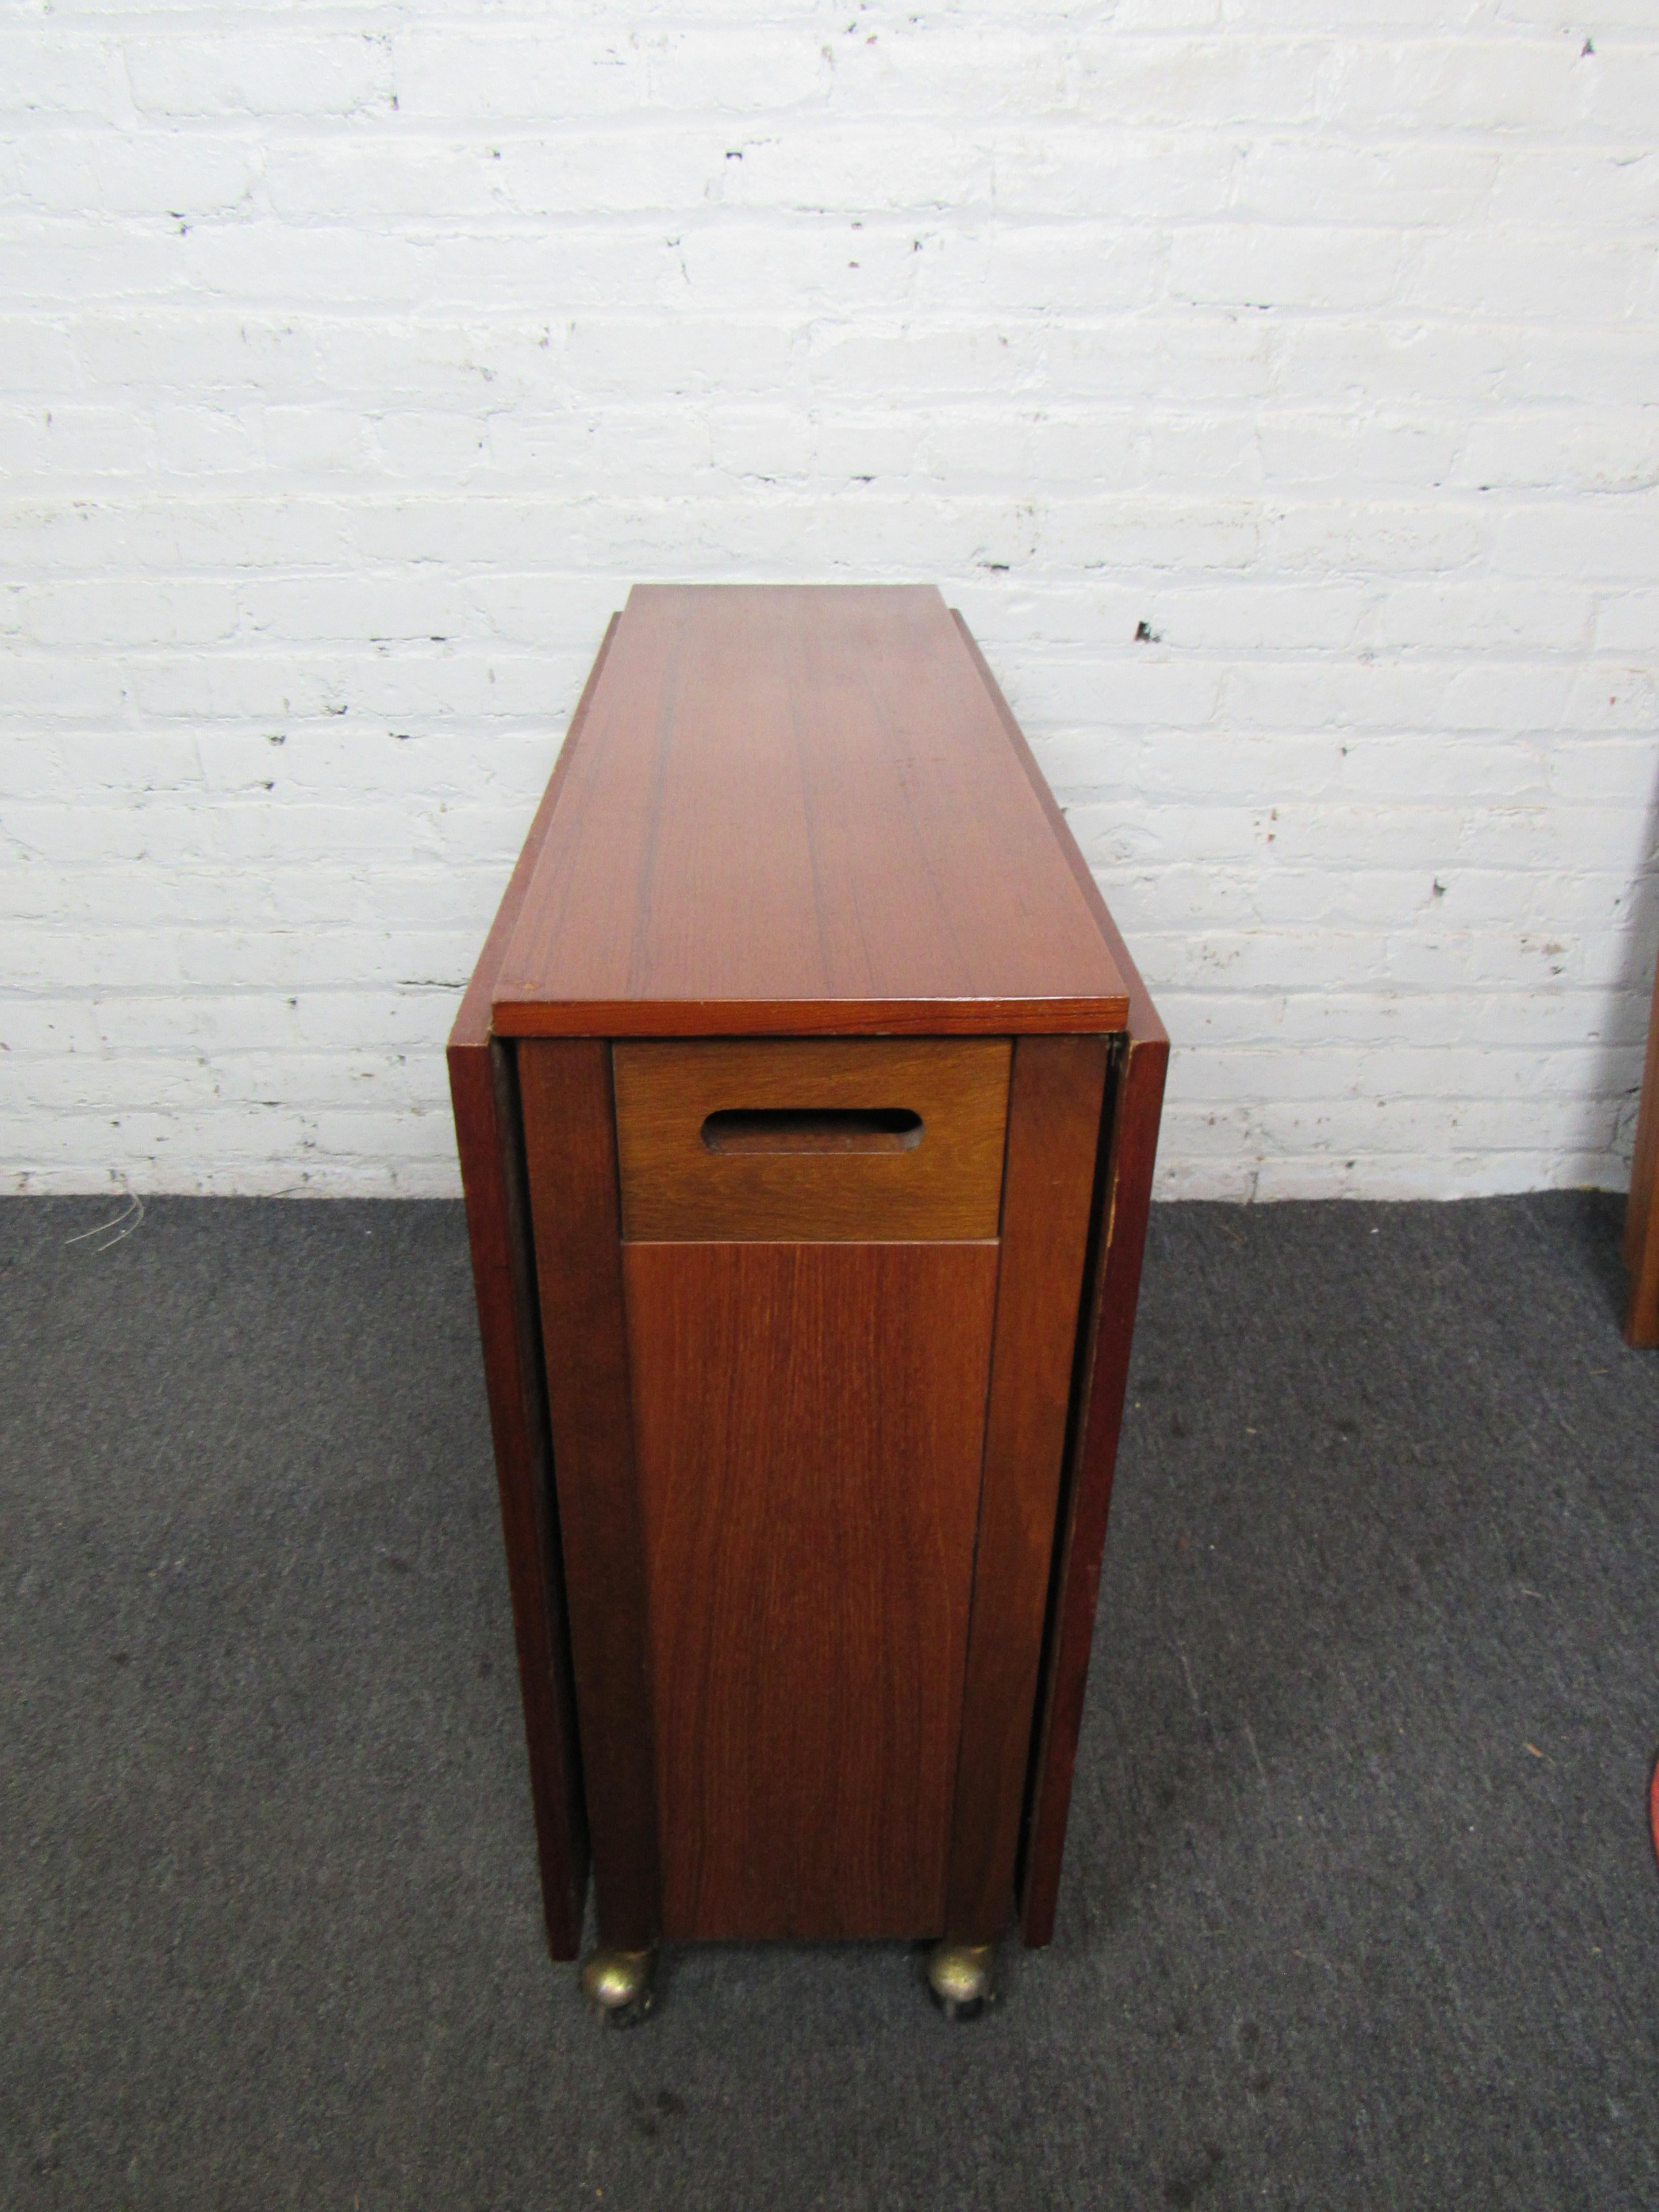 20th Century Danish Drop Leaf Table with Four Folding Chairs